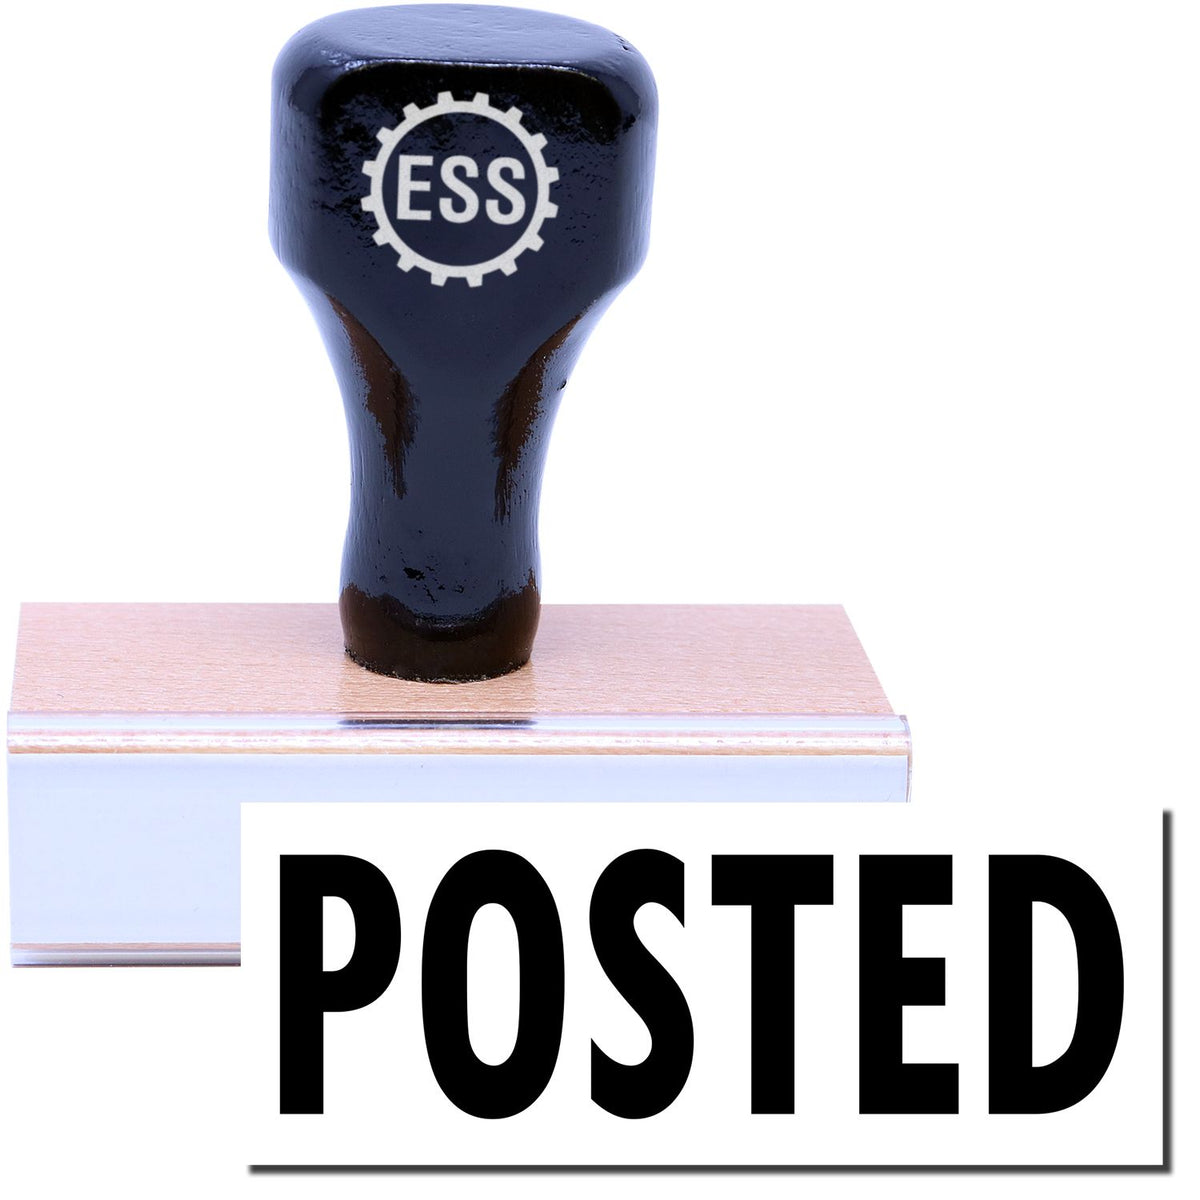 A stock office rubber stamp with a stamped image showing how the text &quot;POSTED&quot; in a large font is displayed after stamping.